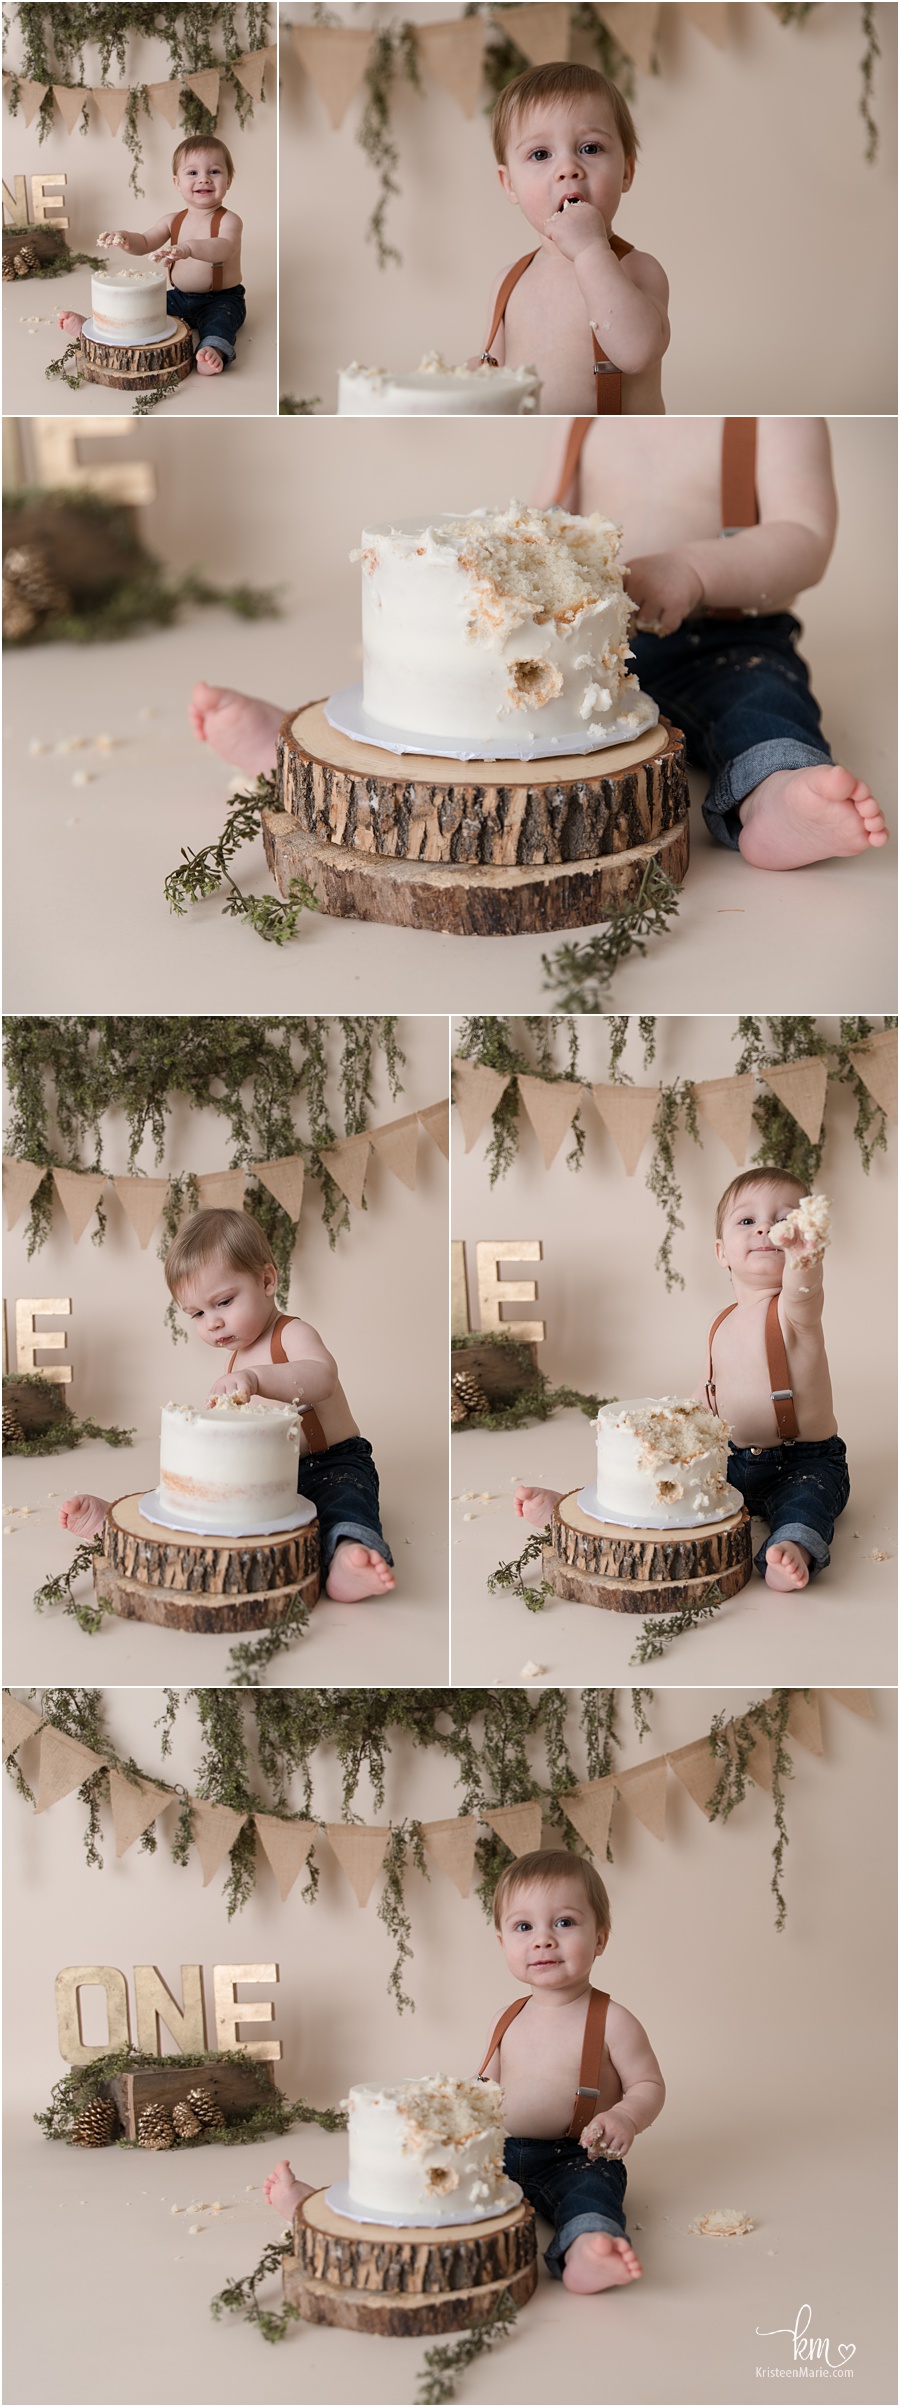 greenery and gold 1st birthday cake smash session - birthday boy in jeans and suspenders